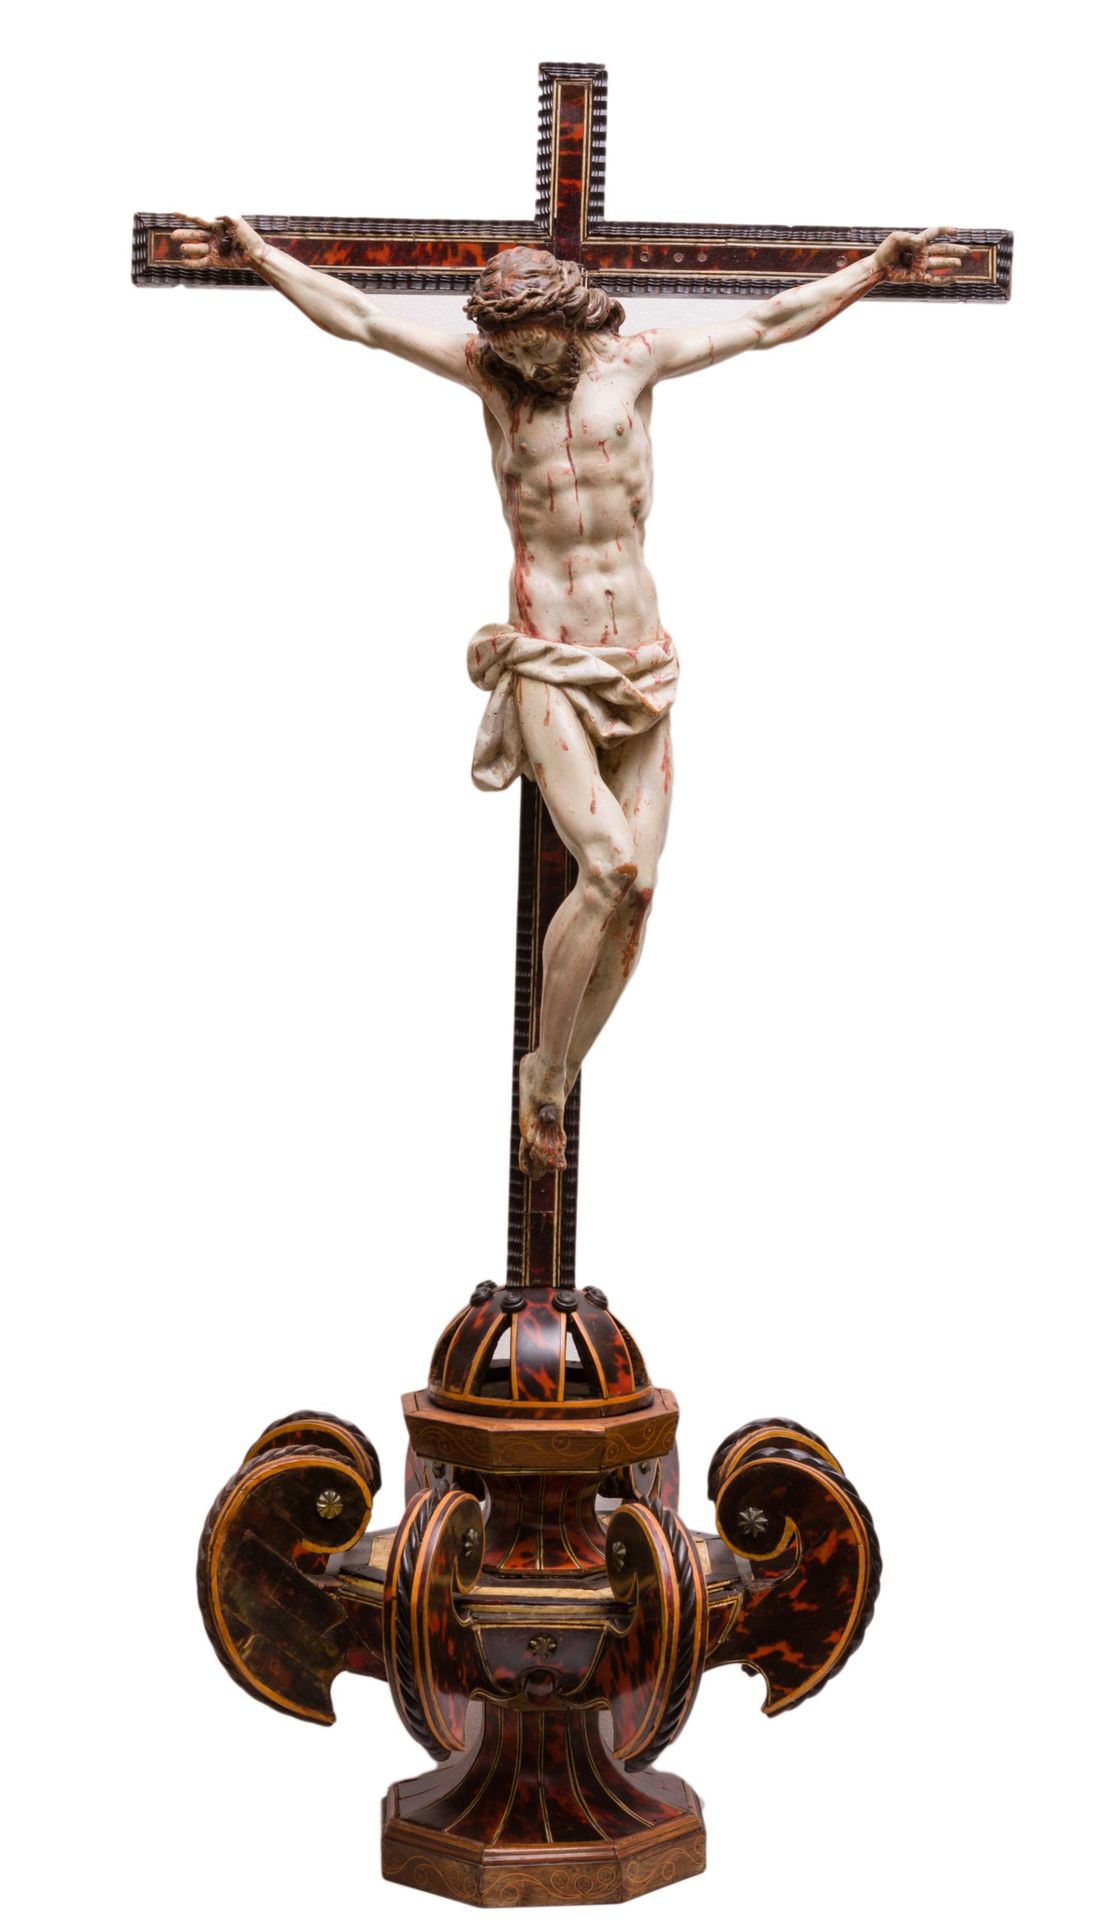 "Crucified Christ". CASTILIAN SCHOOL 17th century Sculpture in carved and polych&hellip;